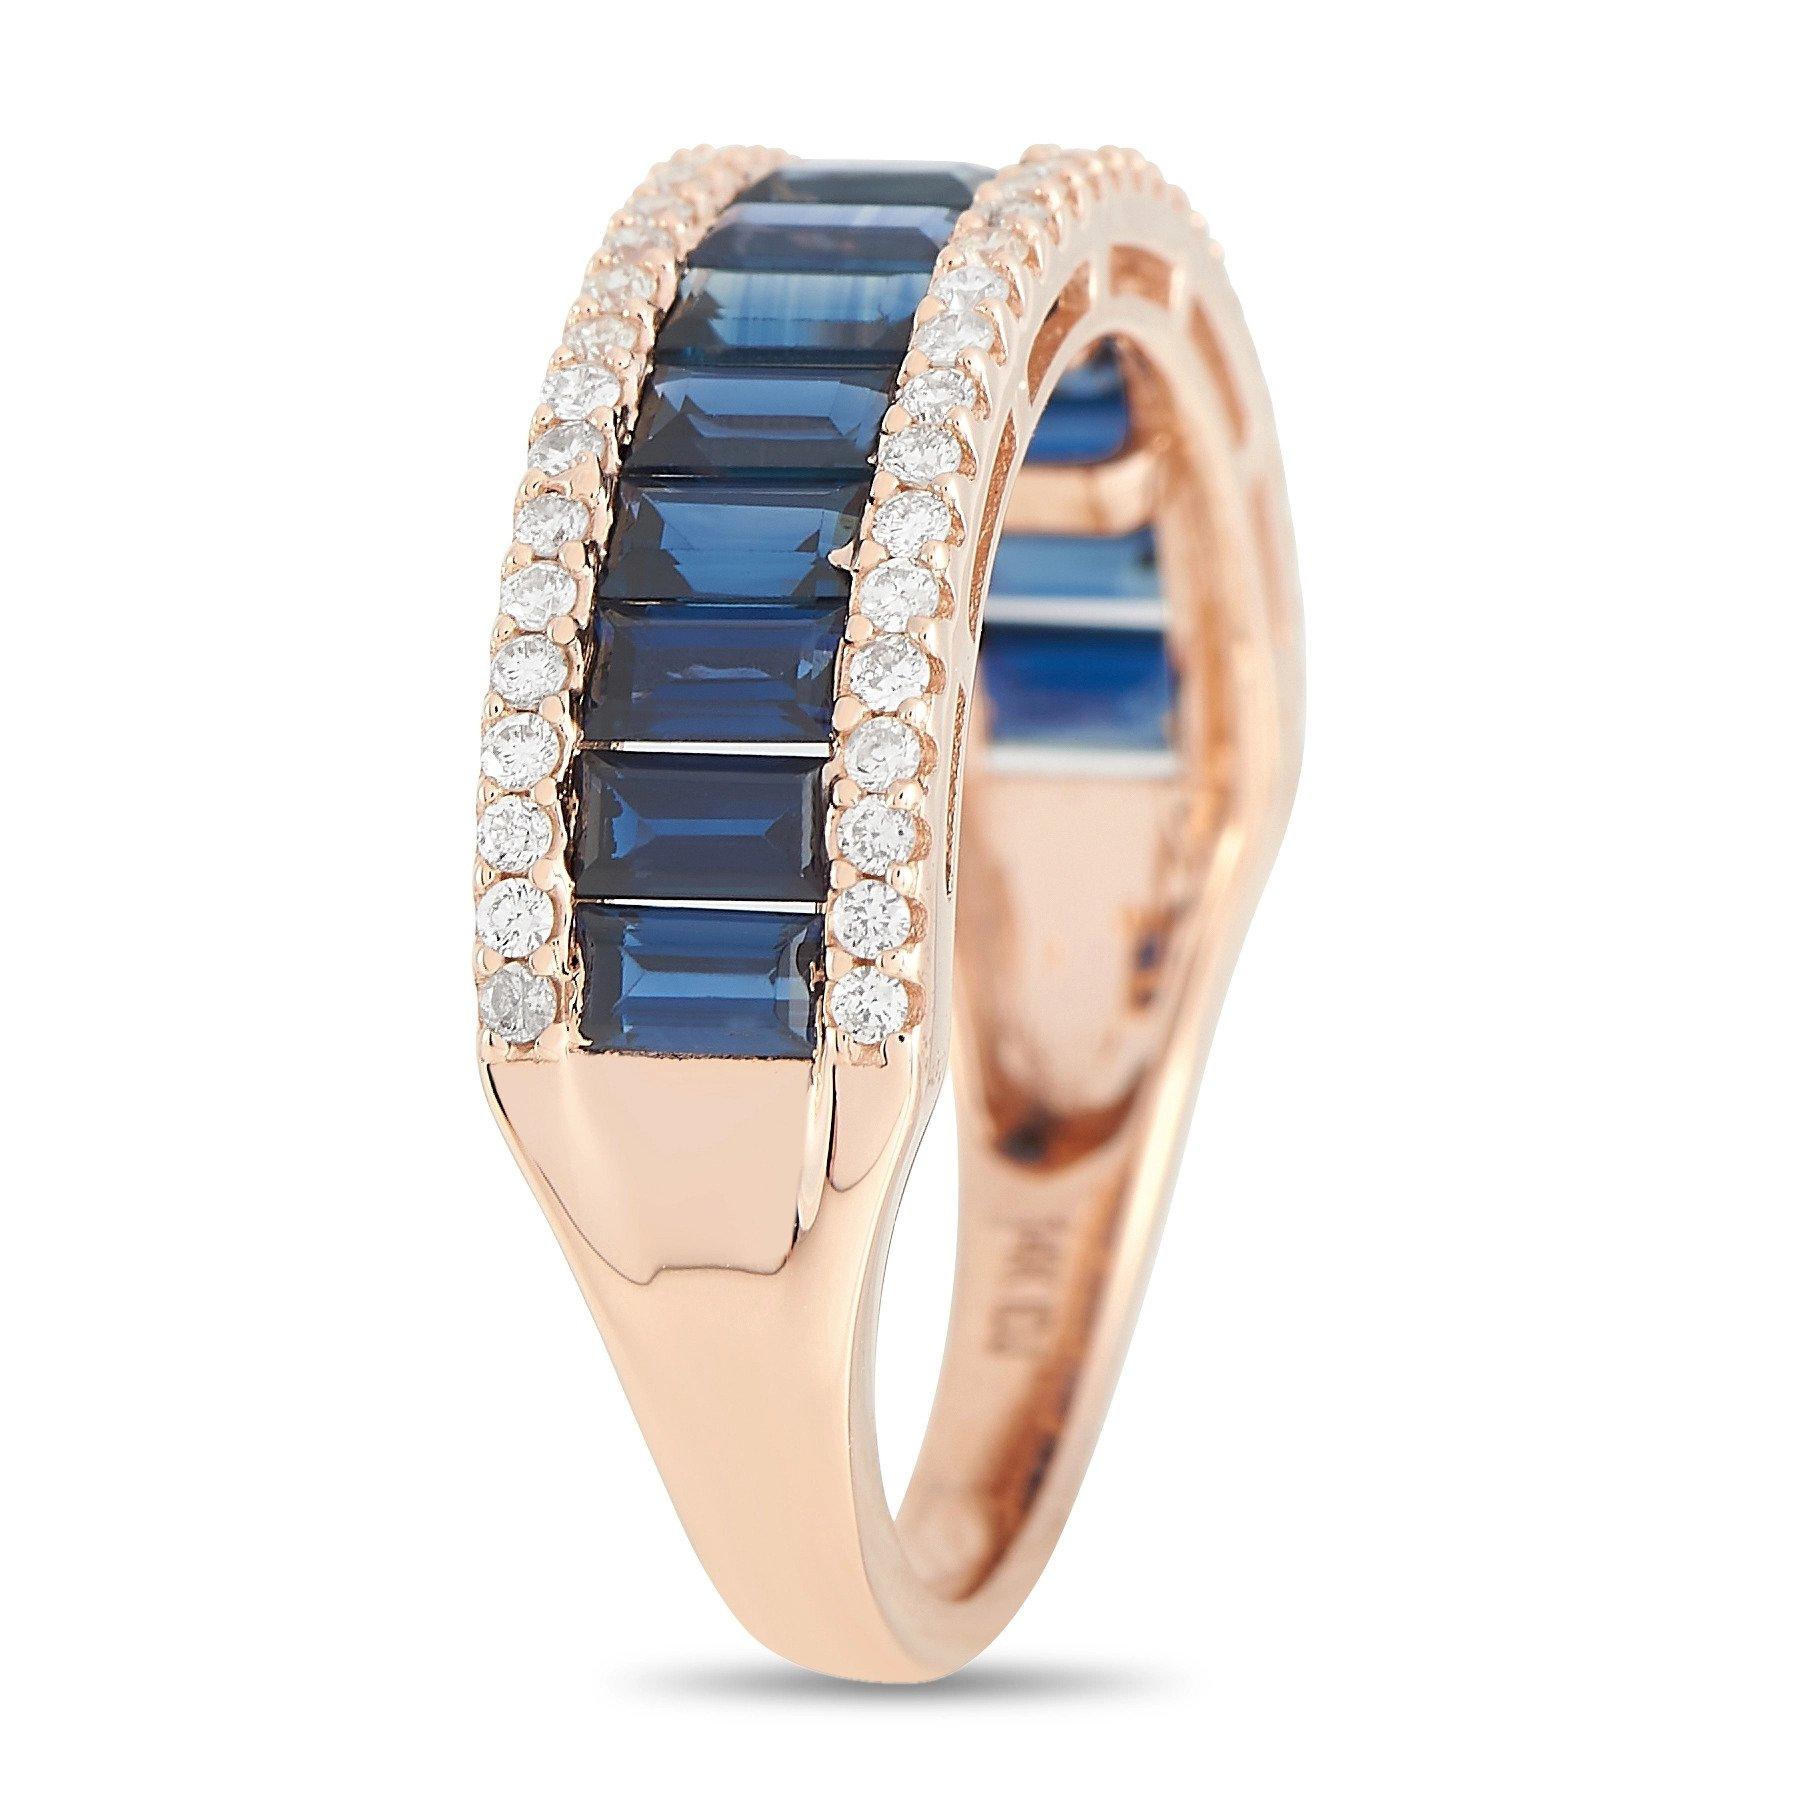 A central row of sapphire gemstones with a total weight of 1.95 carats provide a stunning focal point on this elegant ring. With a simple setting crafted from 14K Rose Gold, inset diamonds totaling 0.30 carats make it even more spectacular. This